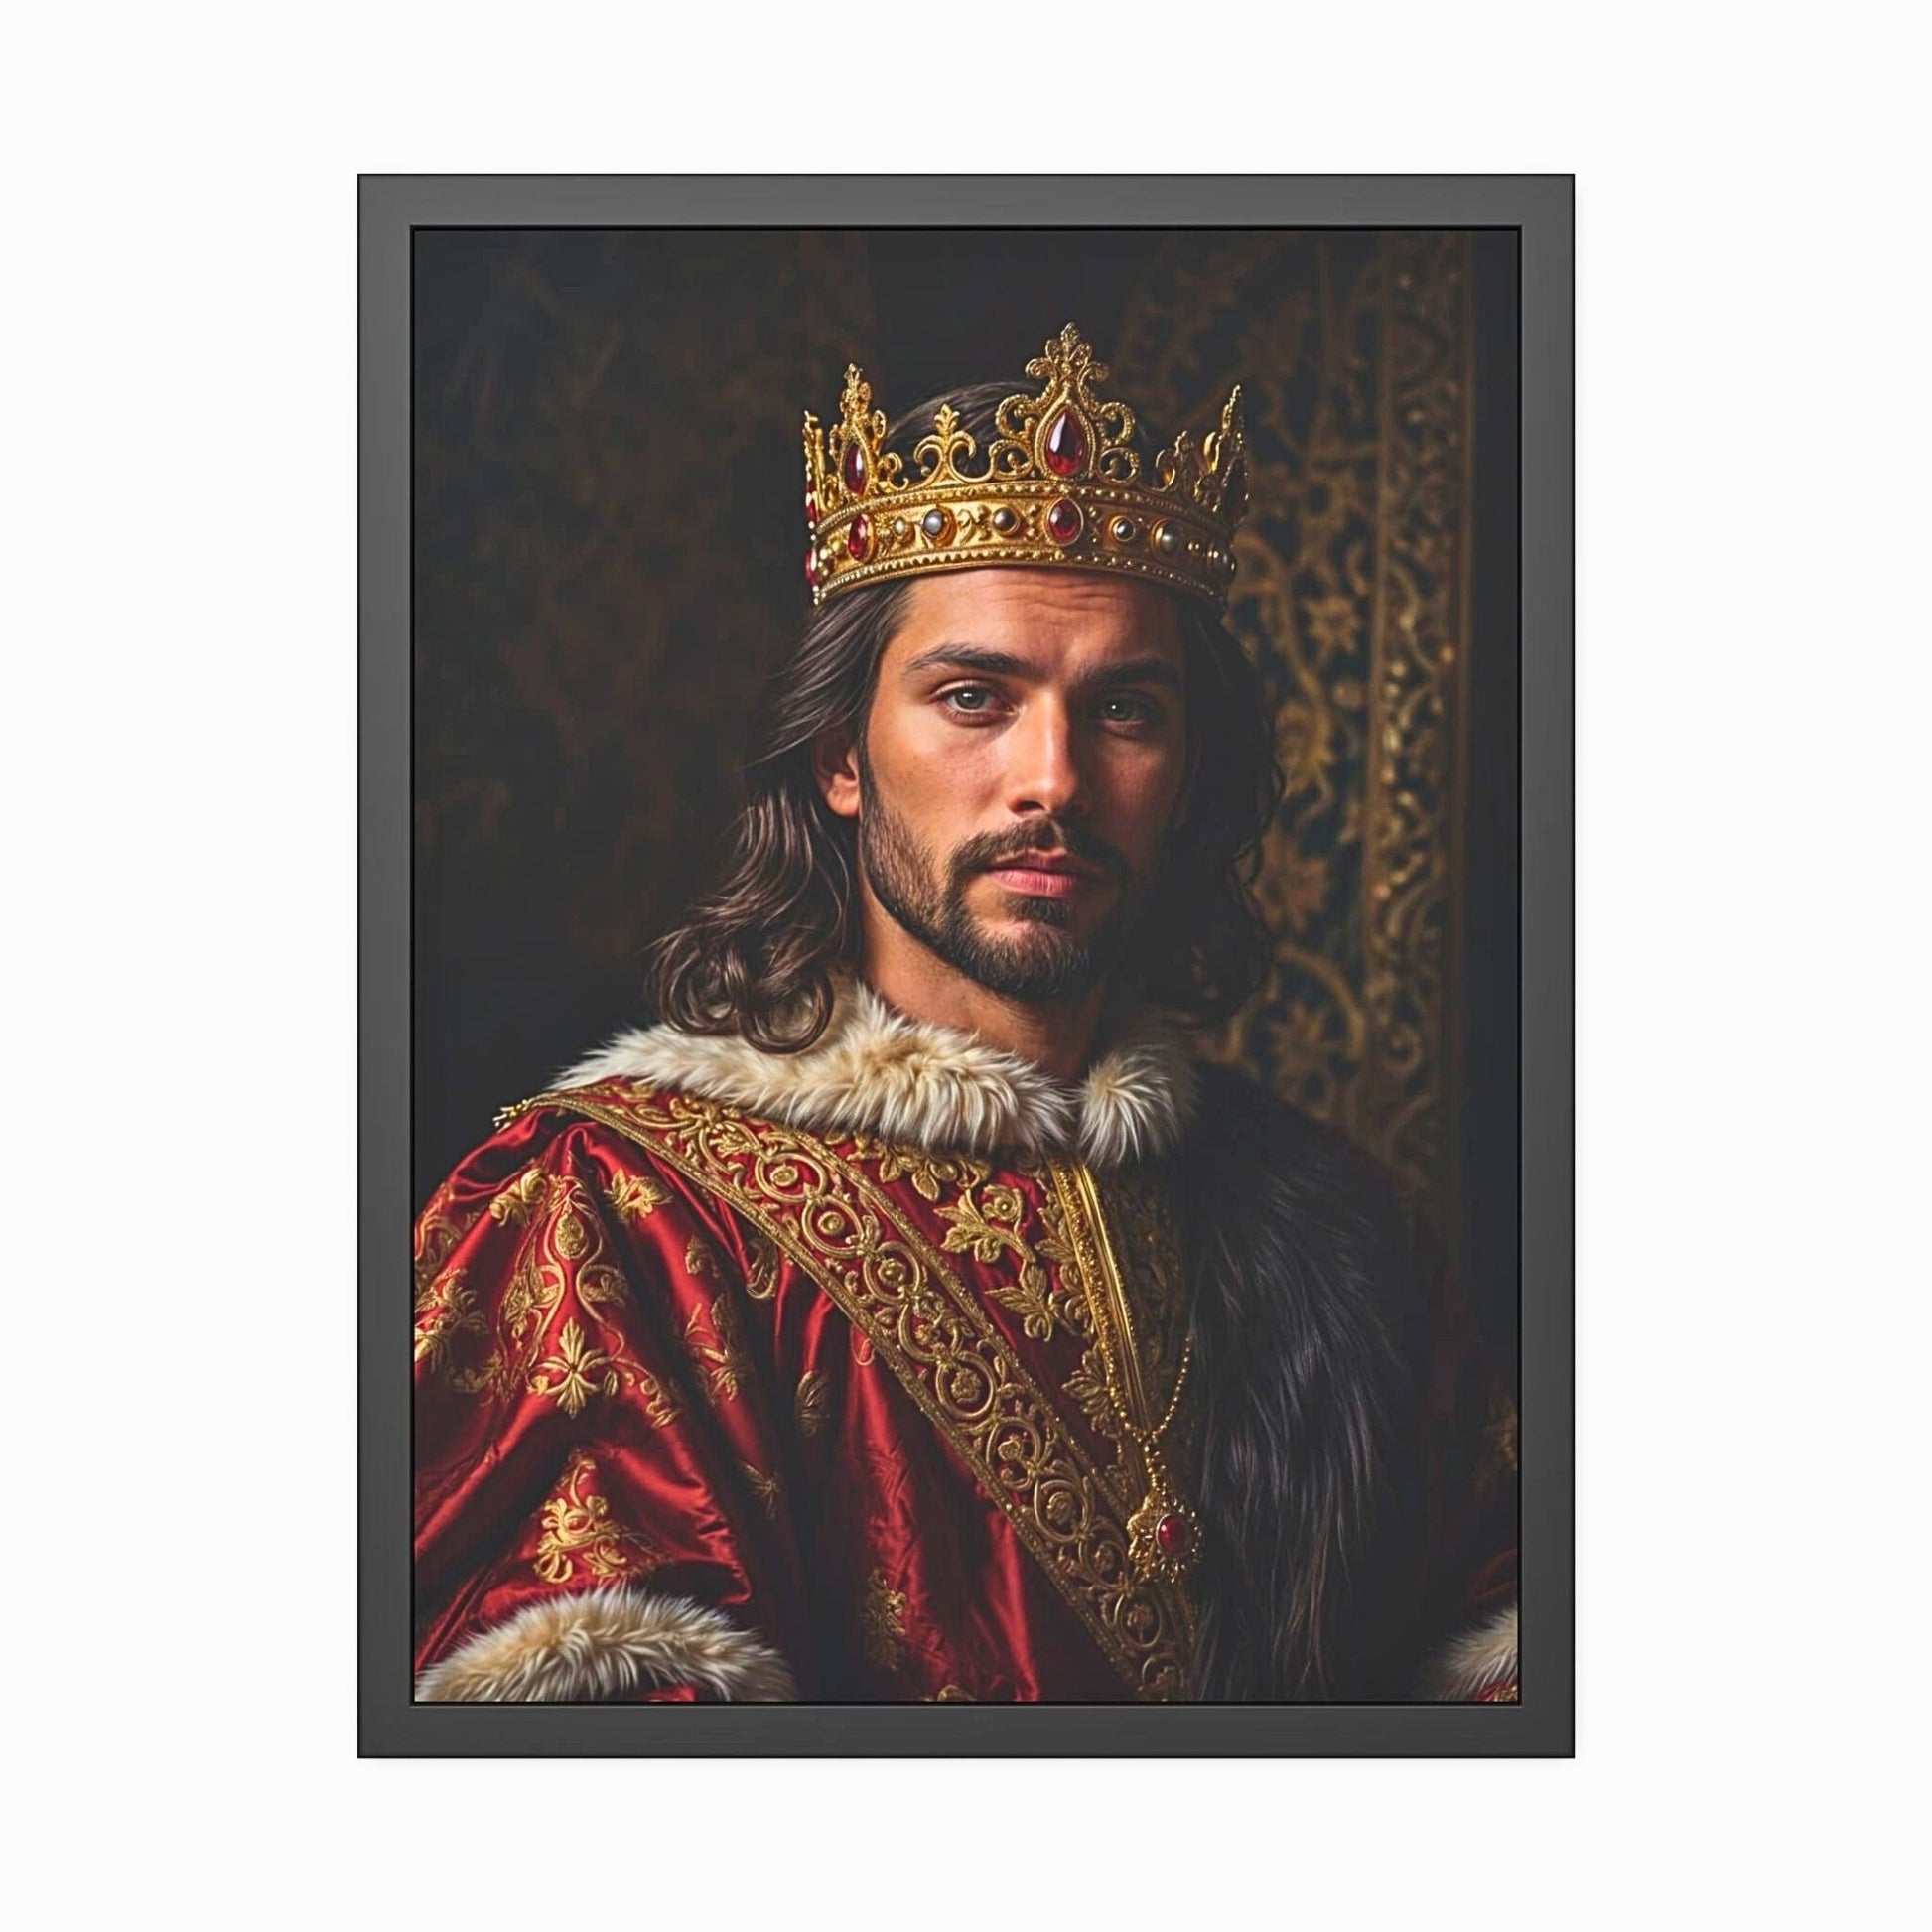 Transform a cherished photo into a majestic custom royal portrait, evoking the elegance of Renaissance artistry. Ideal as a birthday gift or for any occasion, this personalized king portrait captures the essence of regality. Available for digital download, it's a unique and timeless present for him.